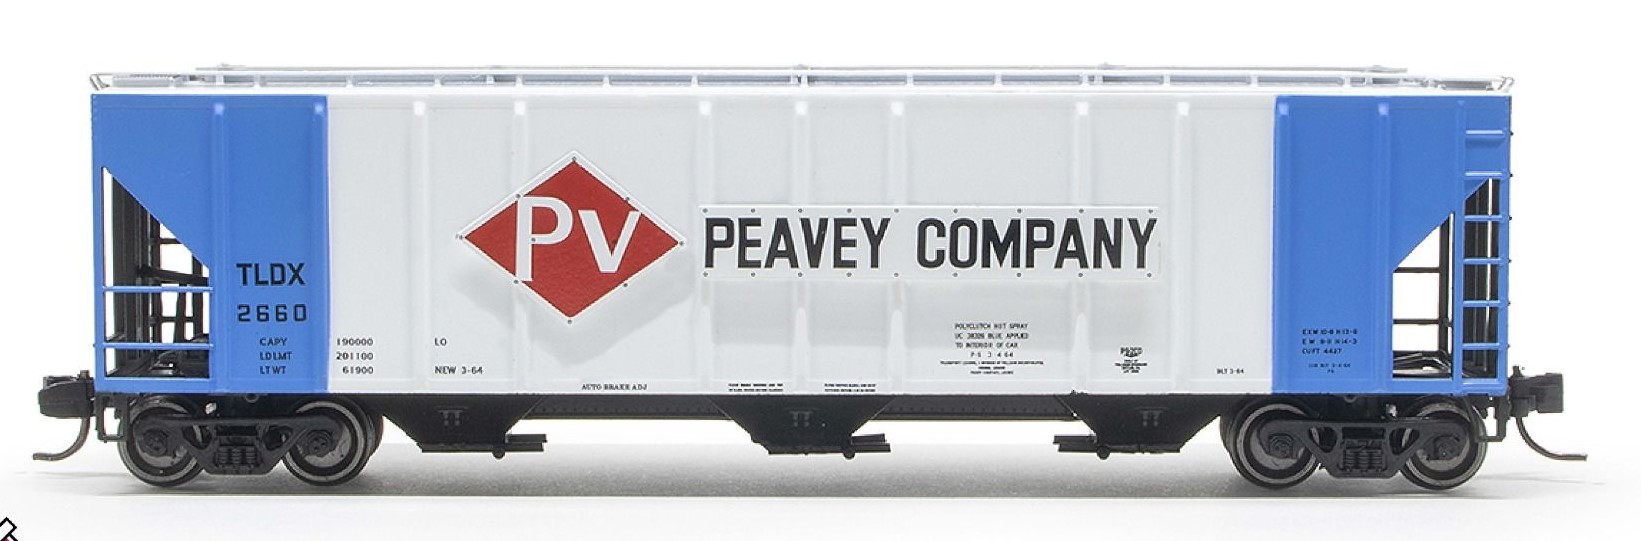 ExactRail N 53020-4 Pullman-Standard 4427 Covered Hopper Peavey '1964 As Delivered' TLDX #2674